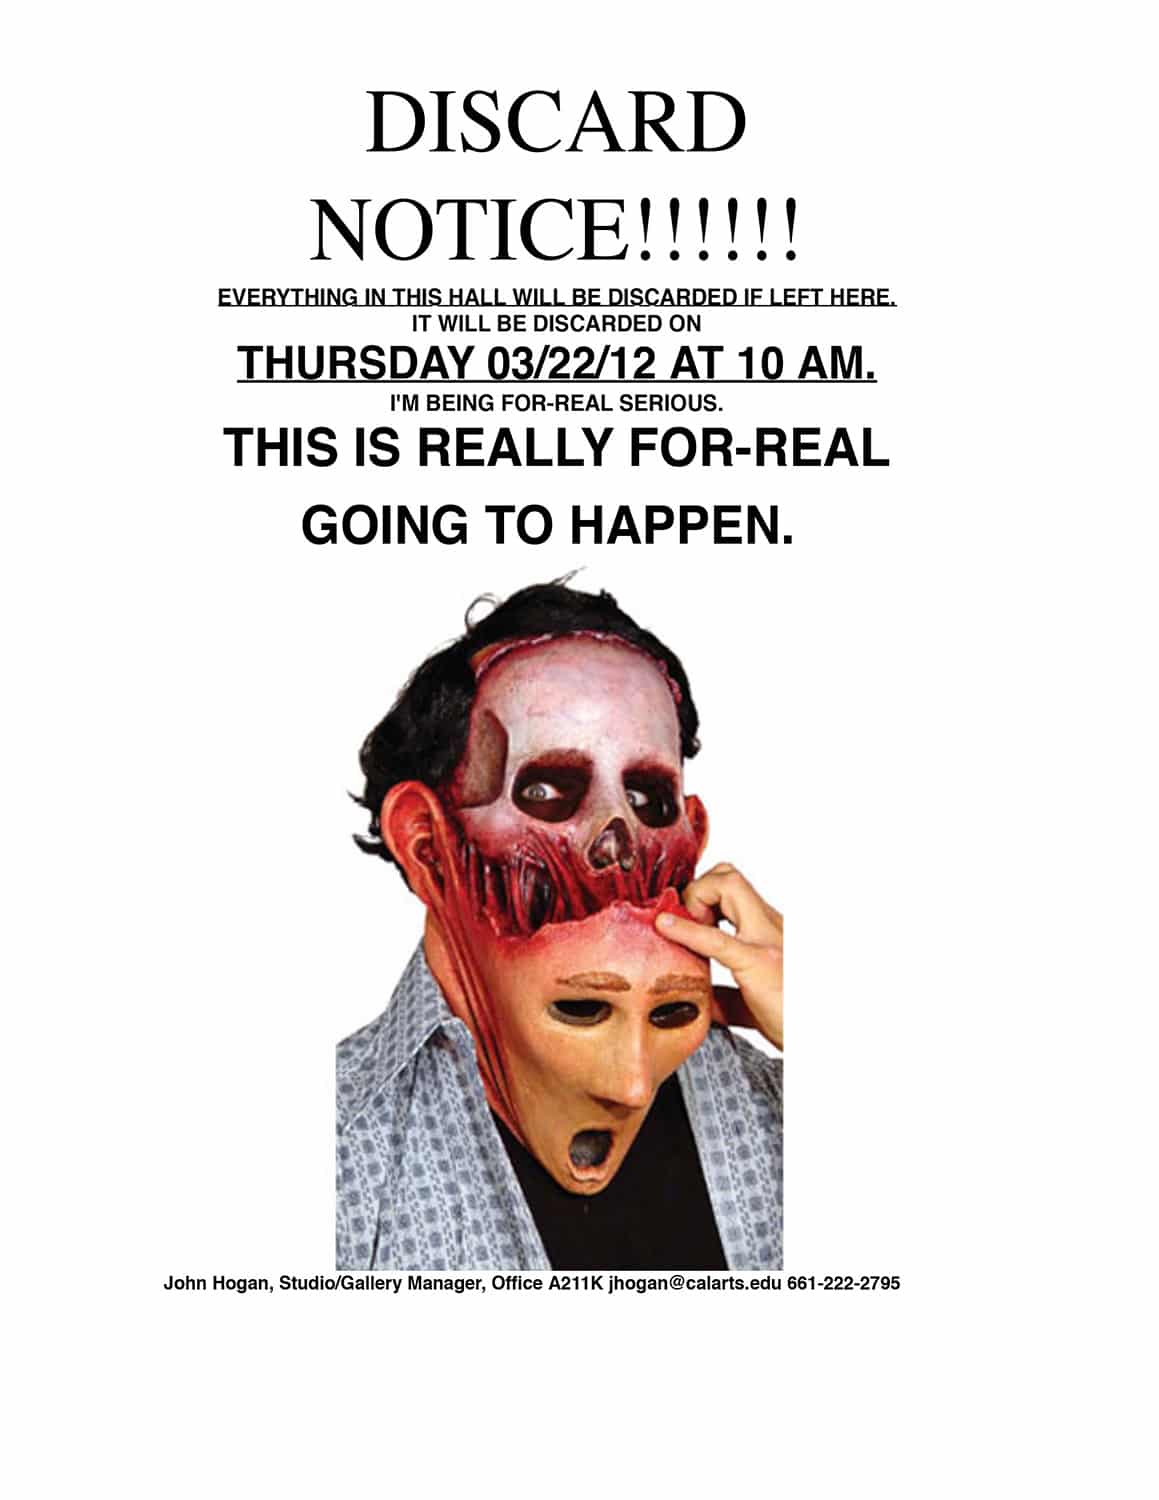 Discard notice with a skeleton pulling off a face mask underneath the text 'This is really for-real going to happen.'